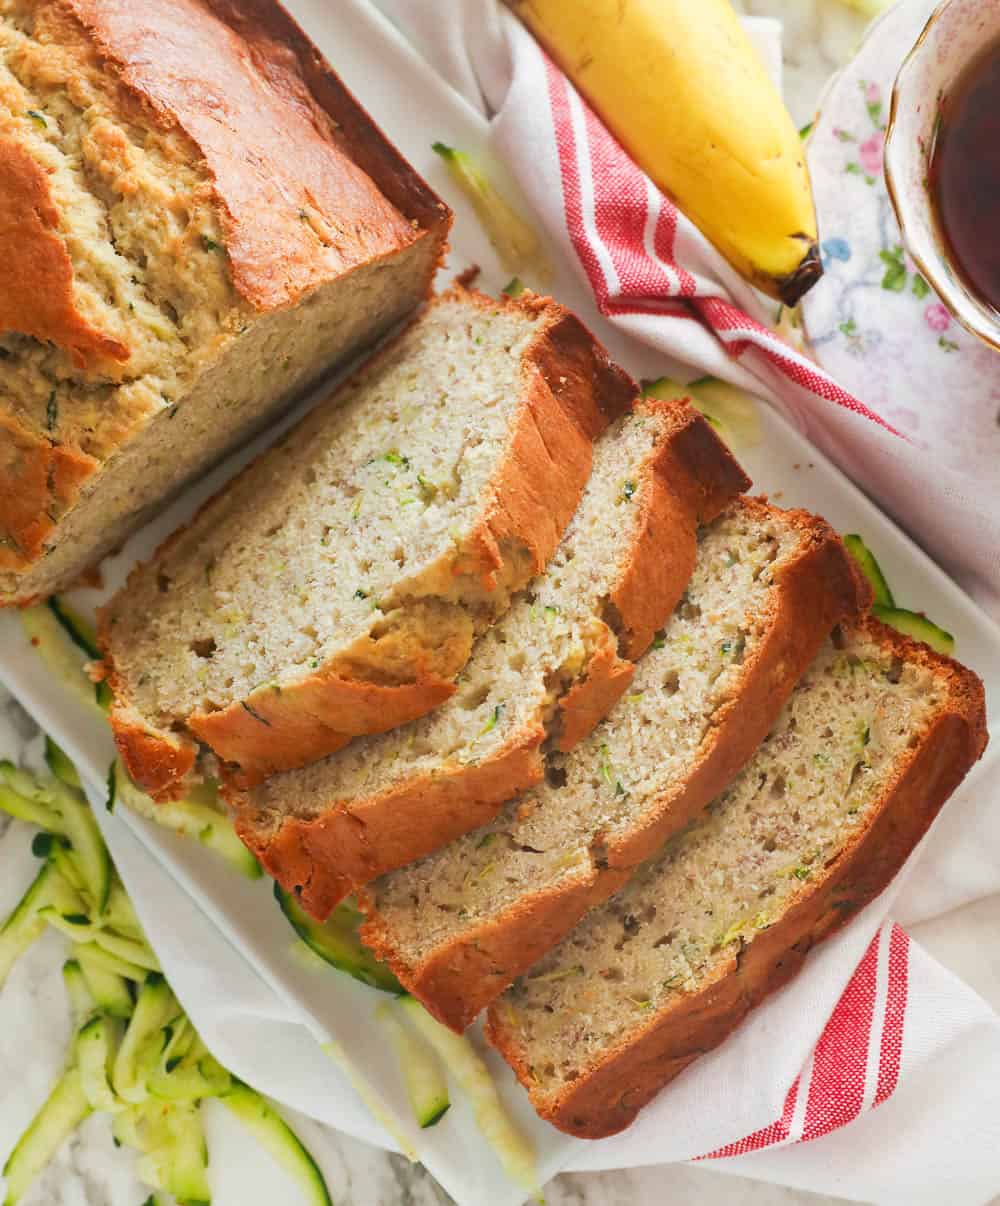 Sliced Banana Zucchini Bread with grated zucchini and bananas in the background